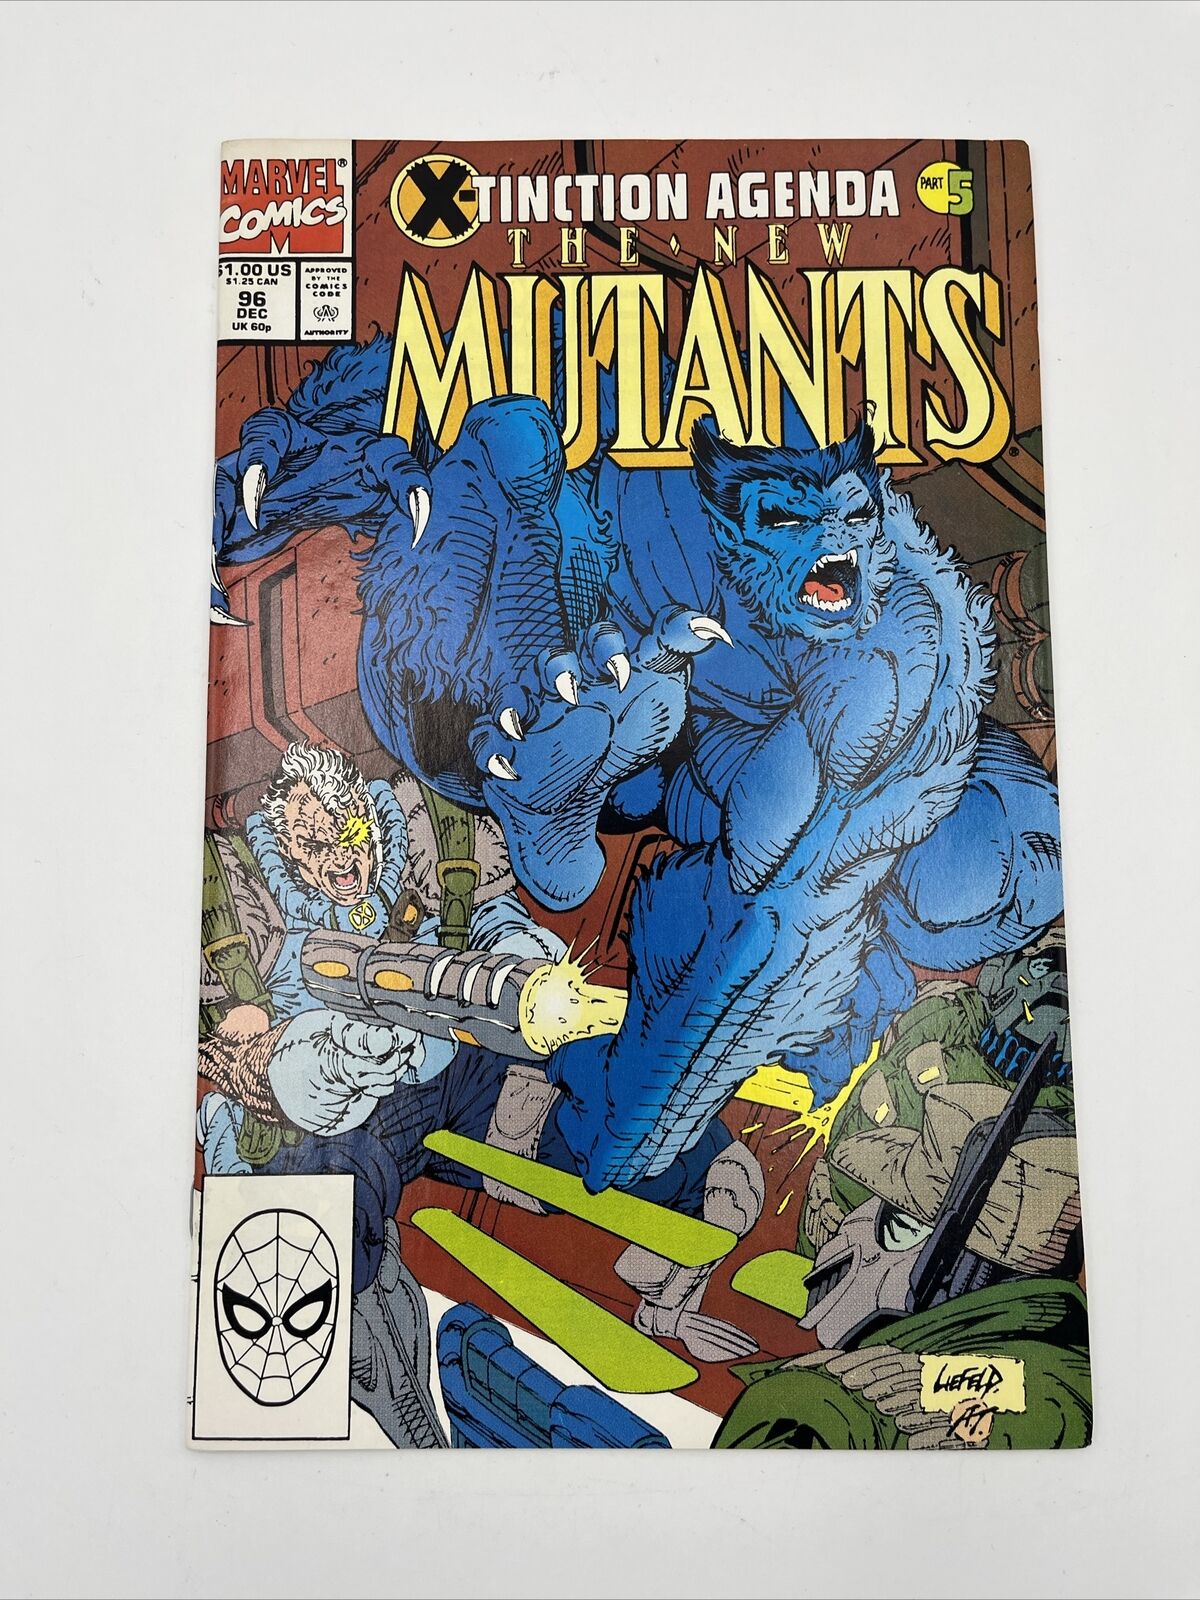 New Mutants #96 HIGH GRADE X Men X Force Weapon X Cable Deadpool Youngblood